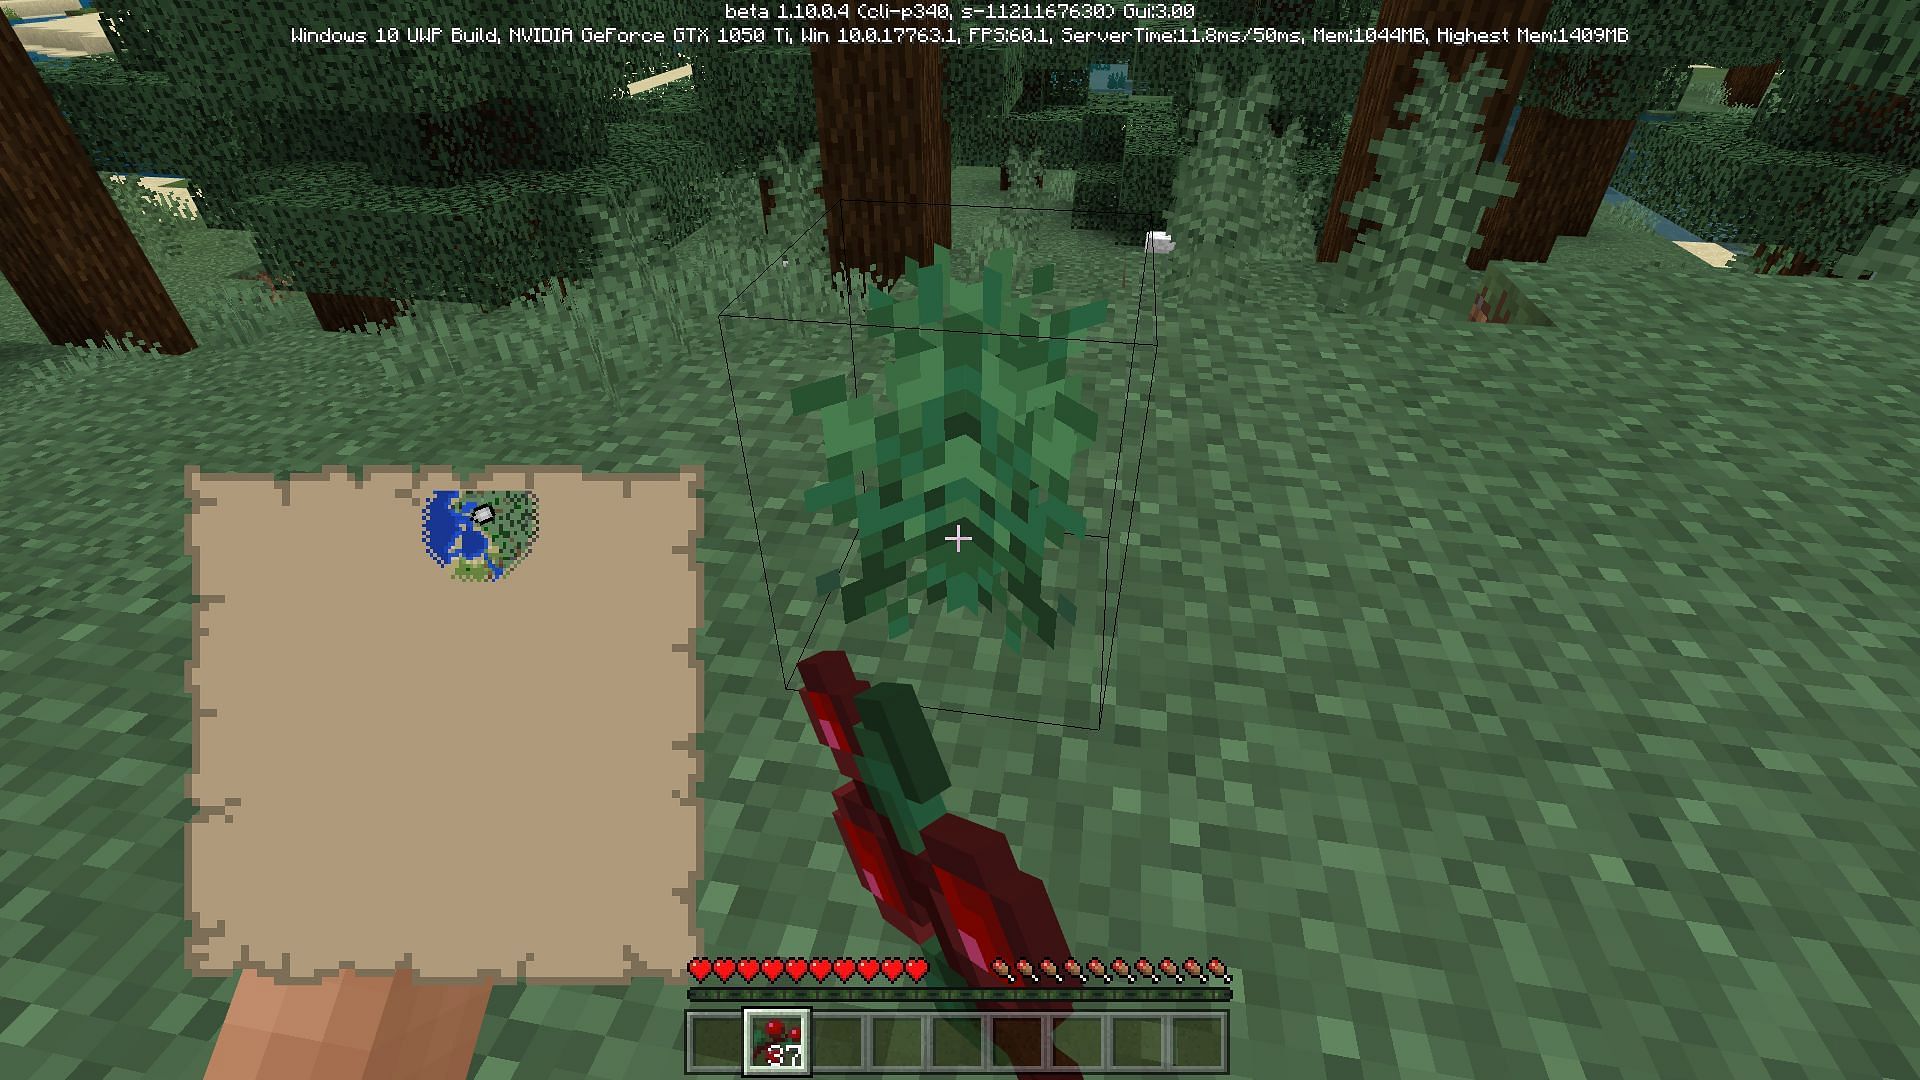 Sweet berries will grow continuously as long as the plant remains (Image via Minecraft)